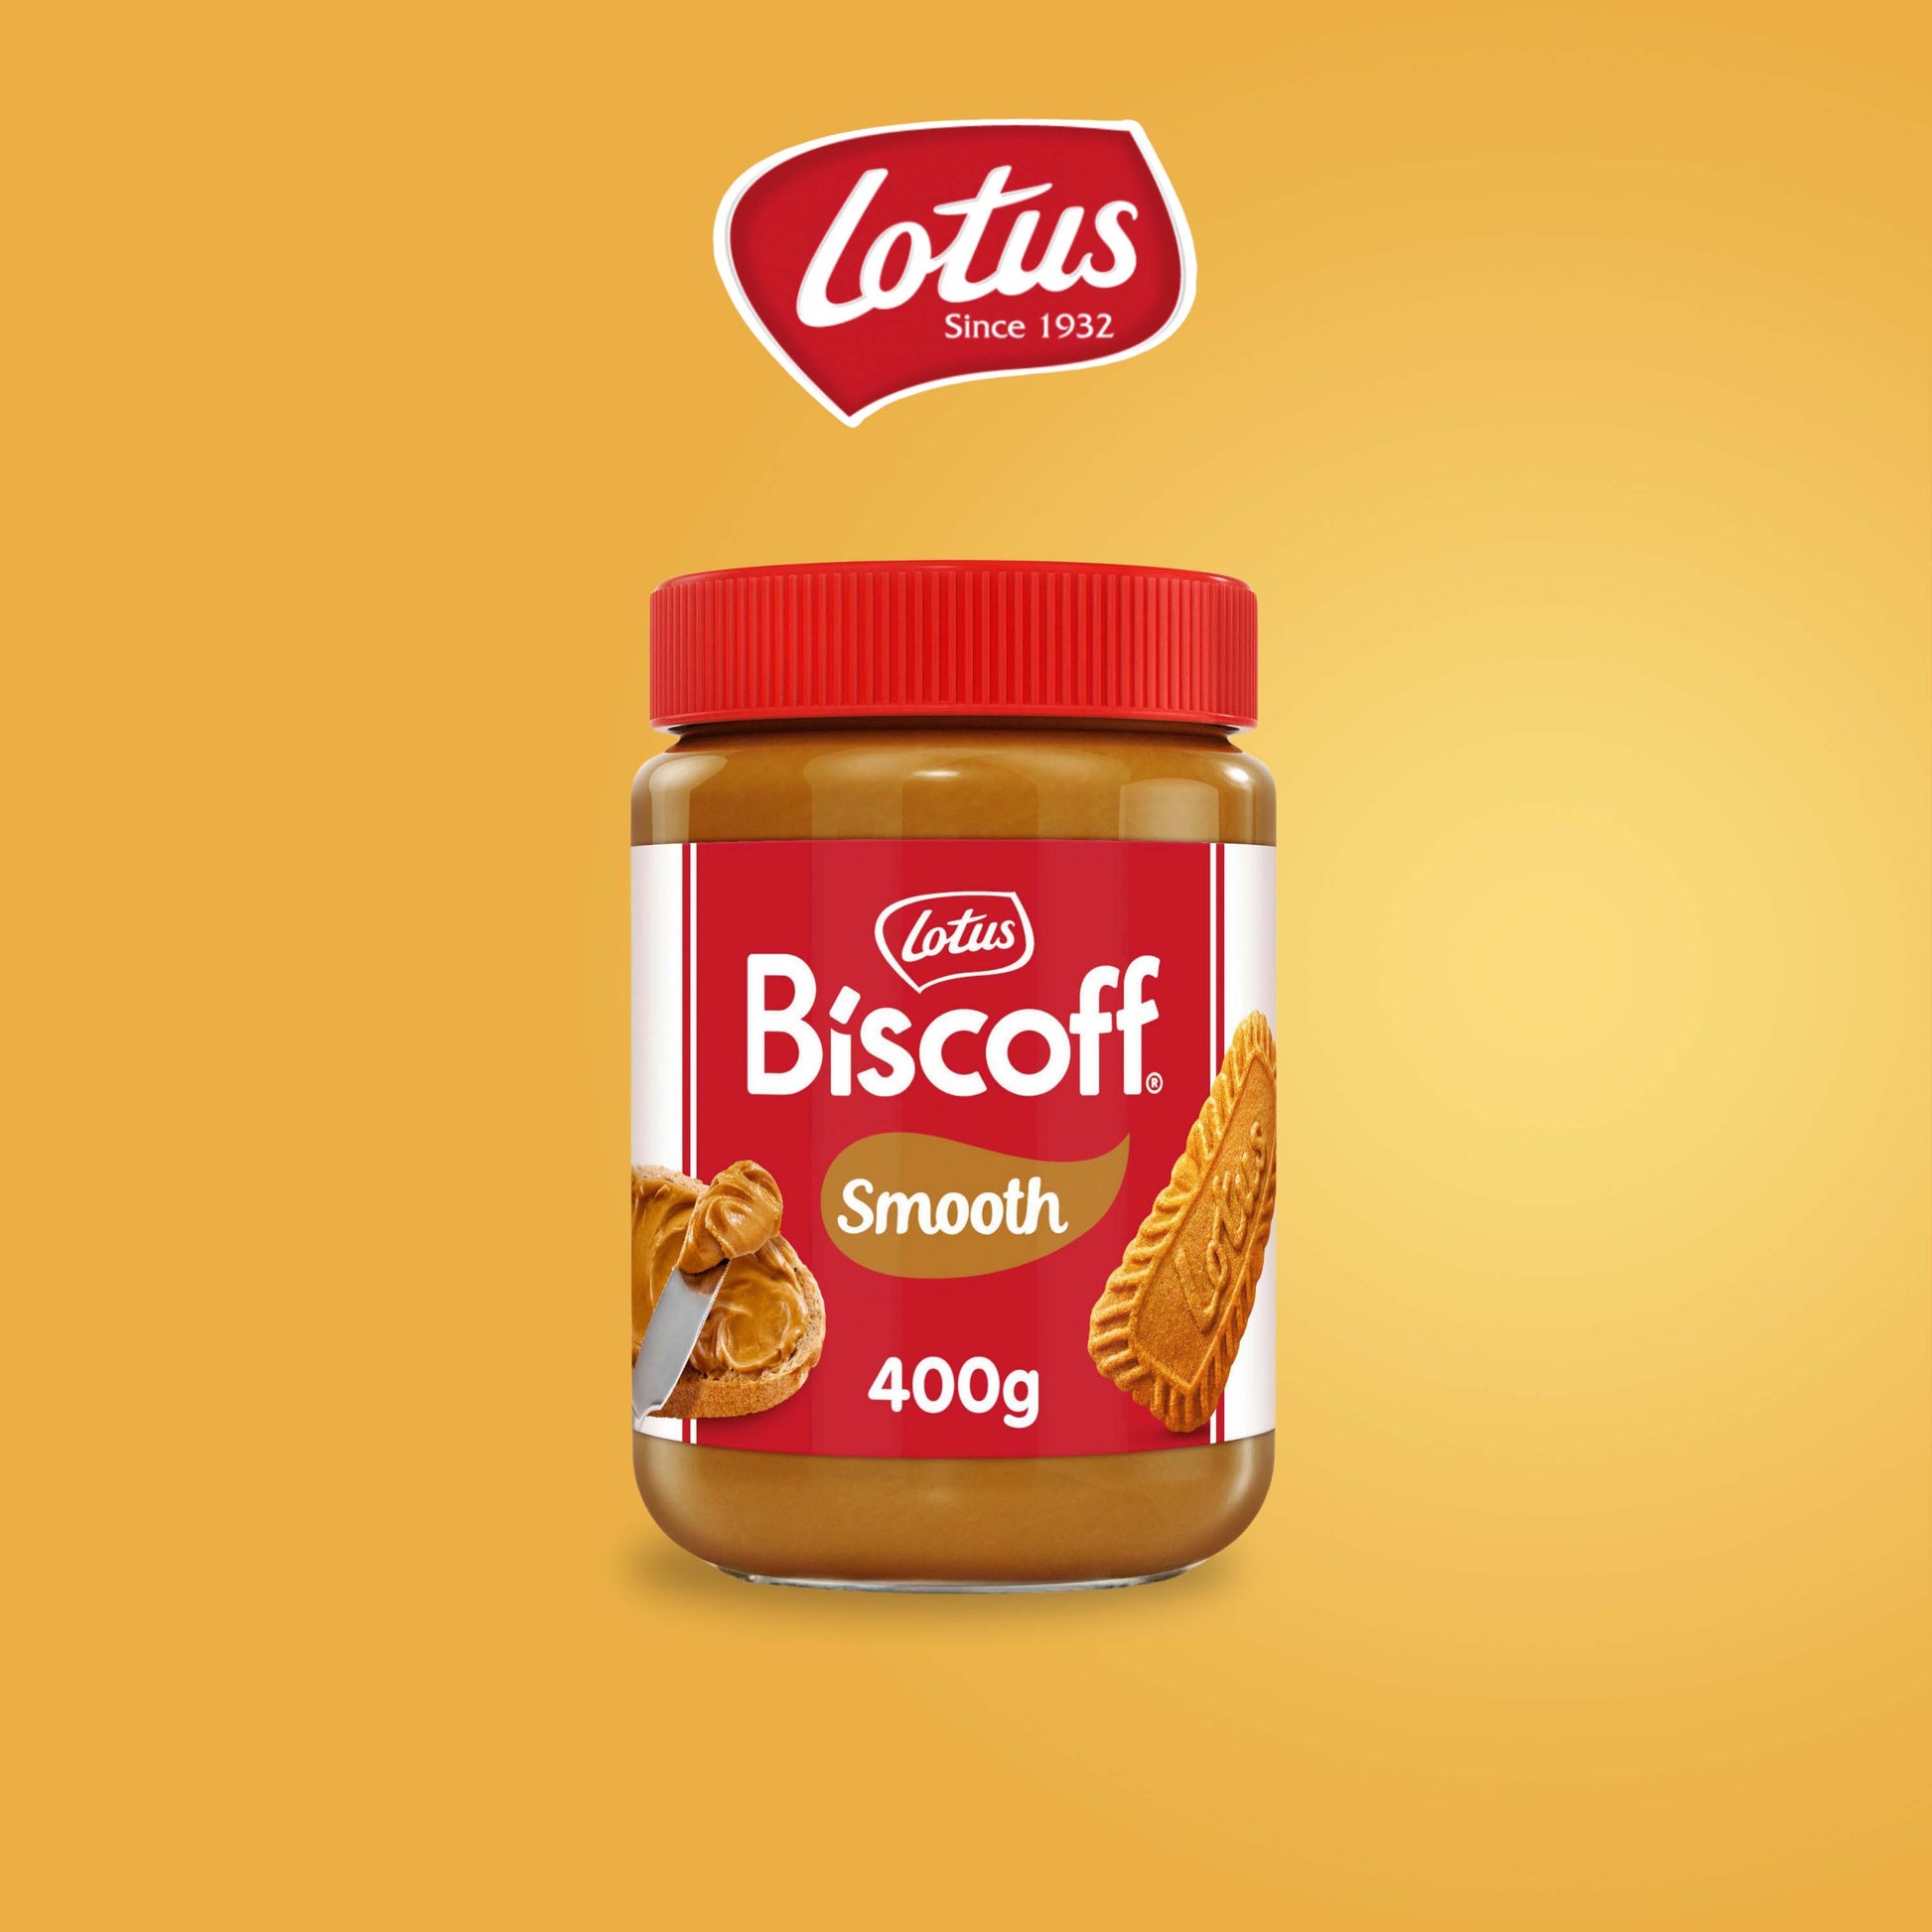 Lotus Biscoff Biscuit Smooth Spread - 400g - CLASSIC SPREADS